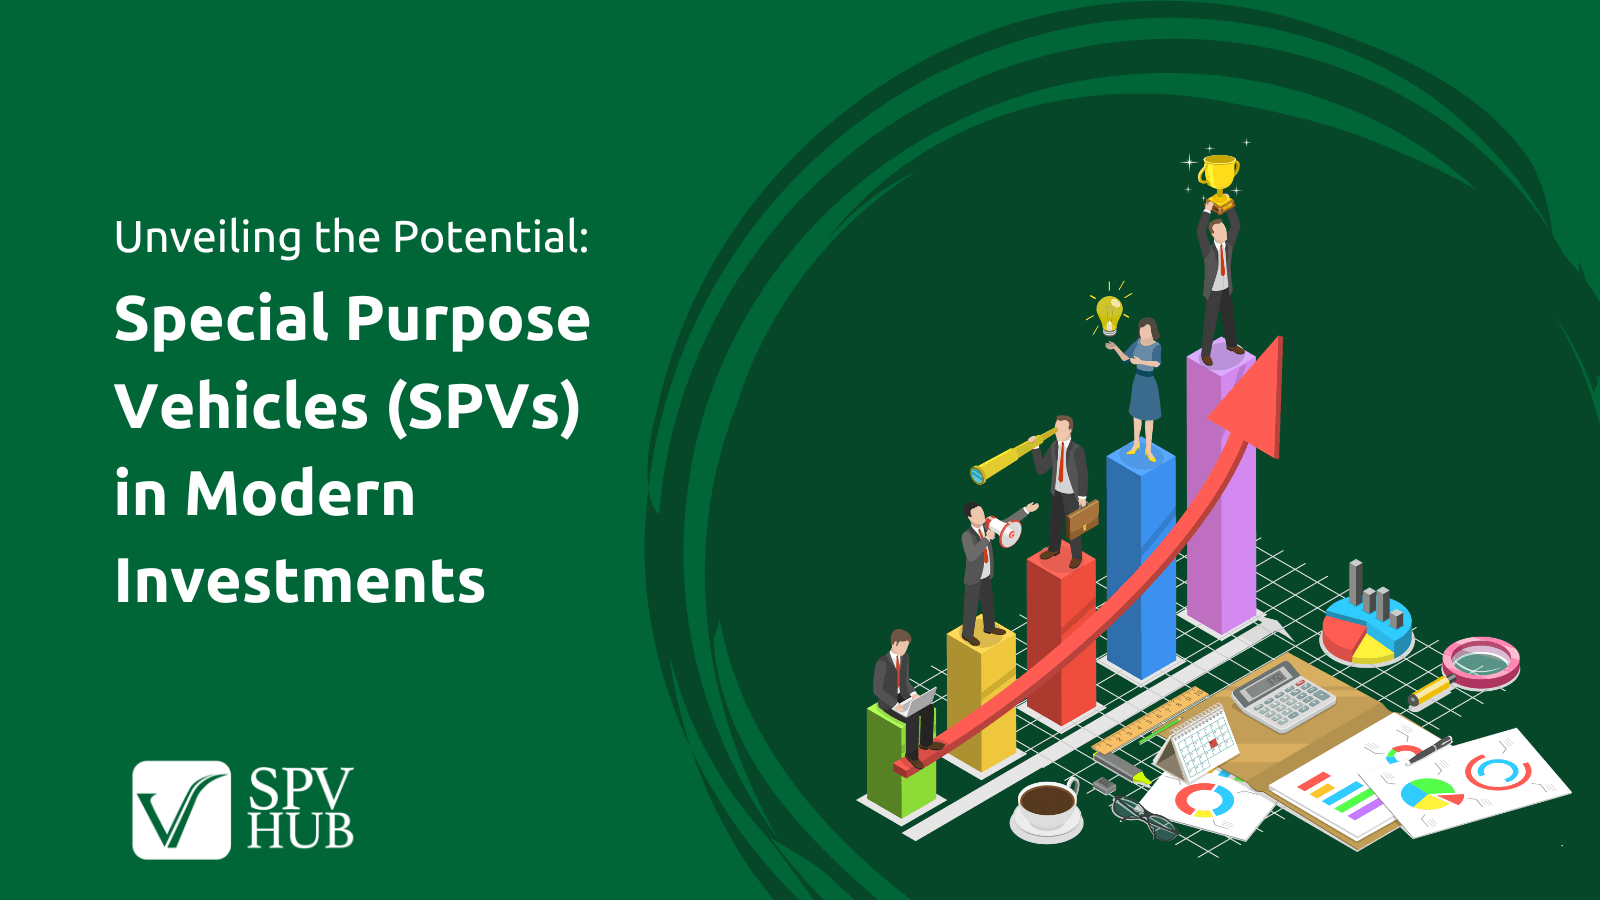 Unveiling the Potential: Special Purpose Vehicles (SPVs) in Modern Investments